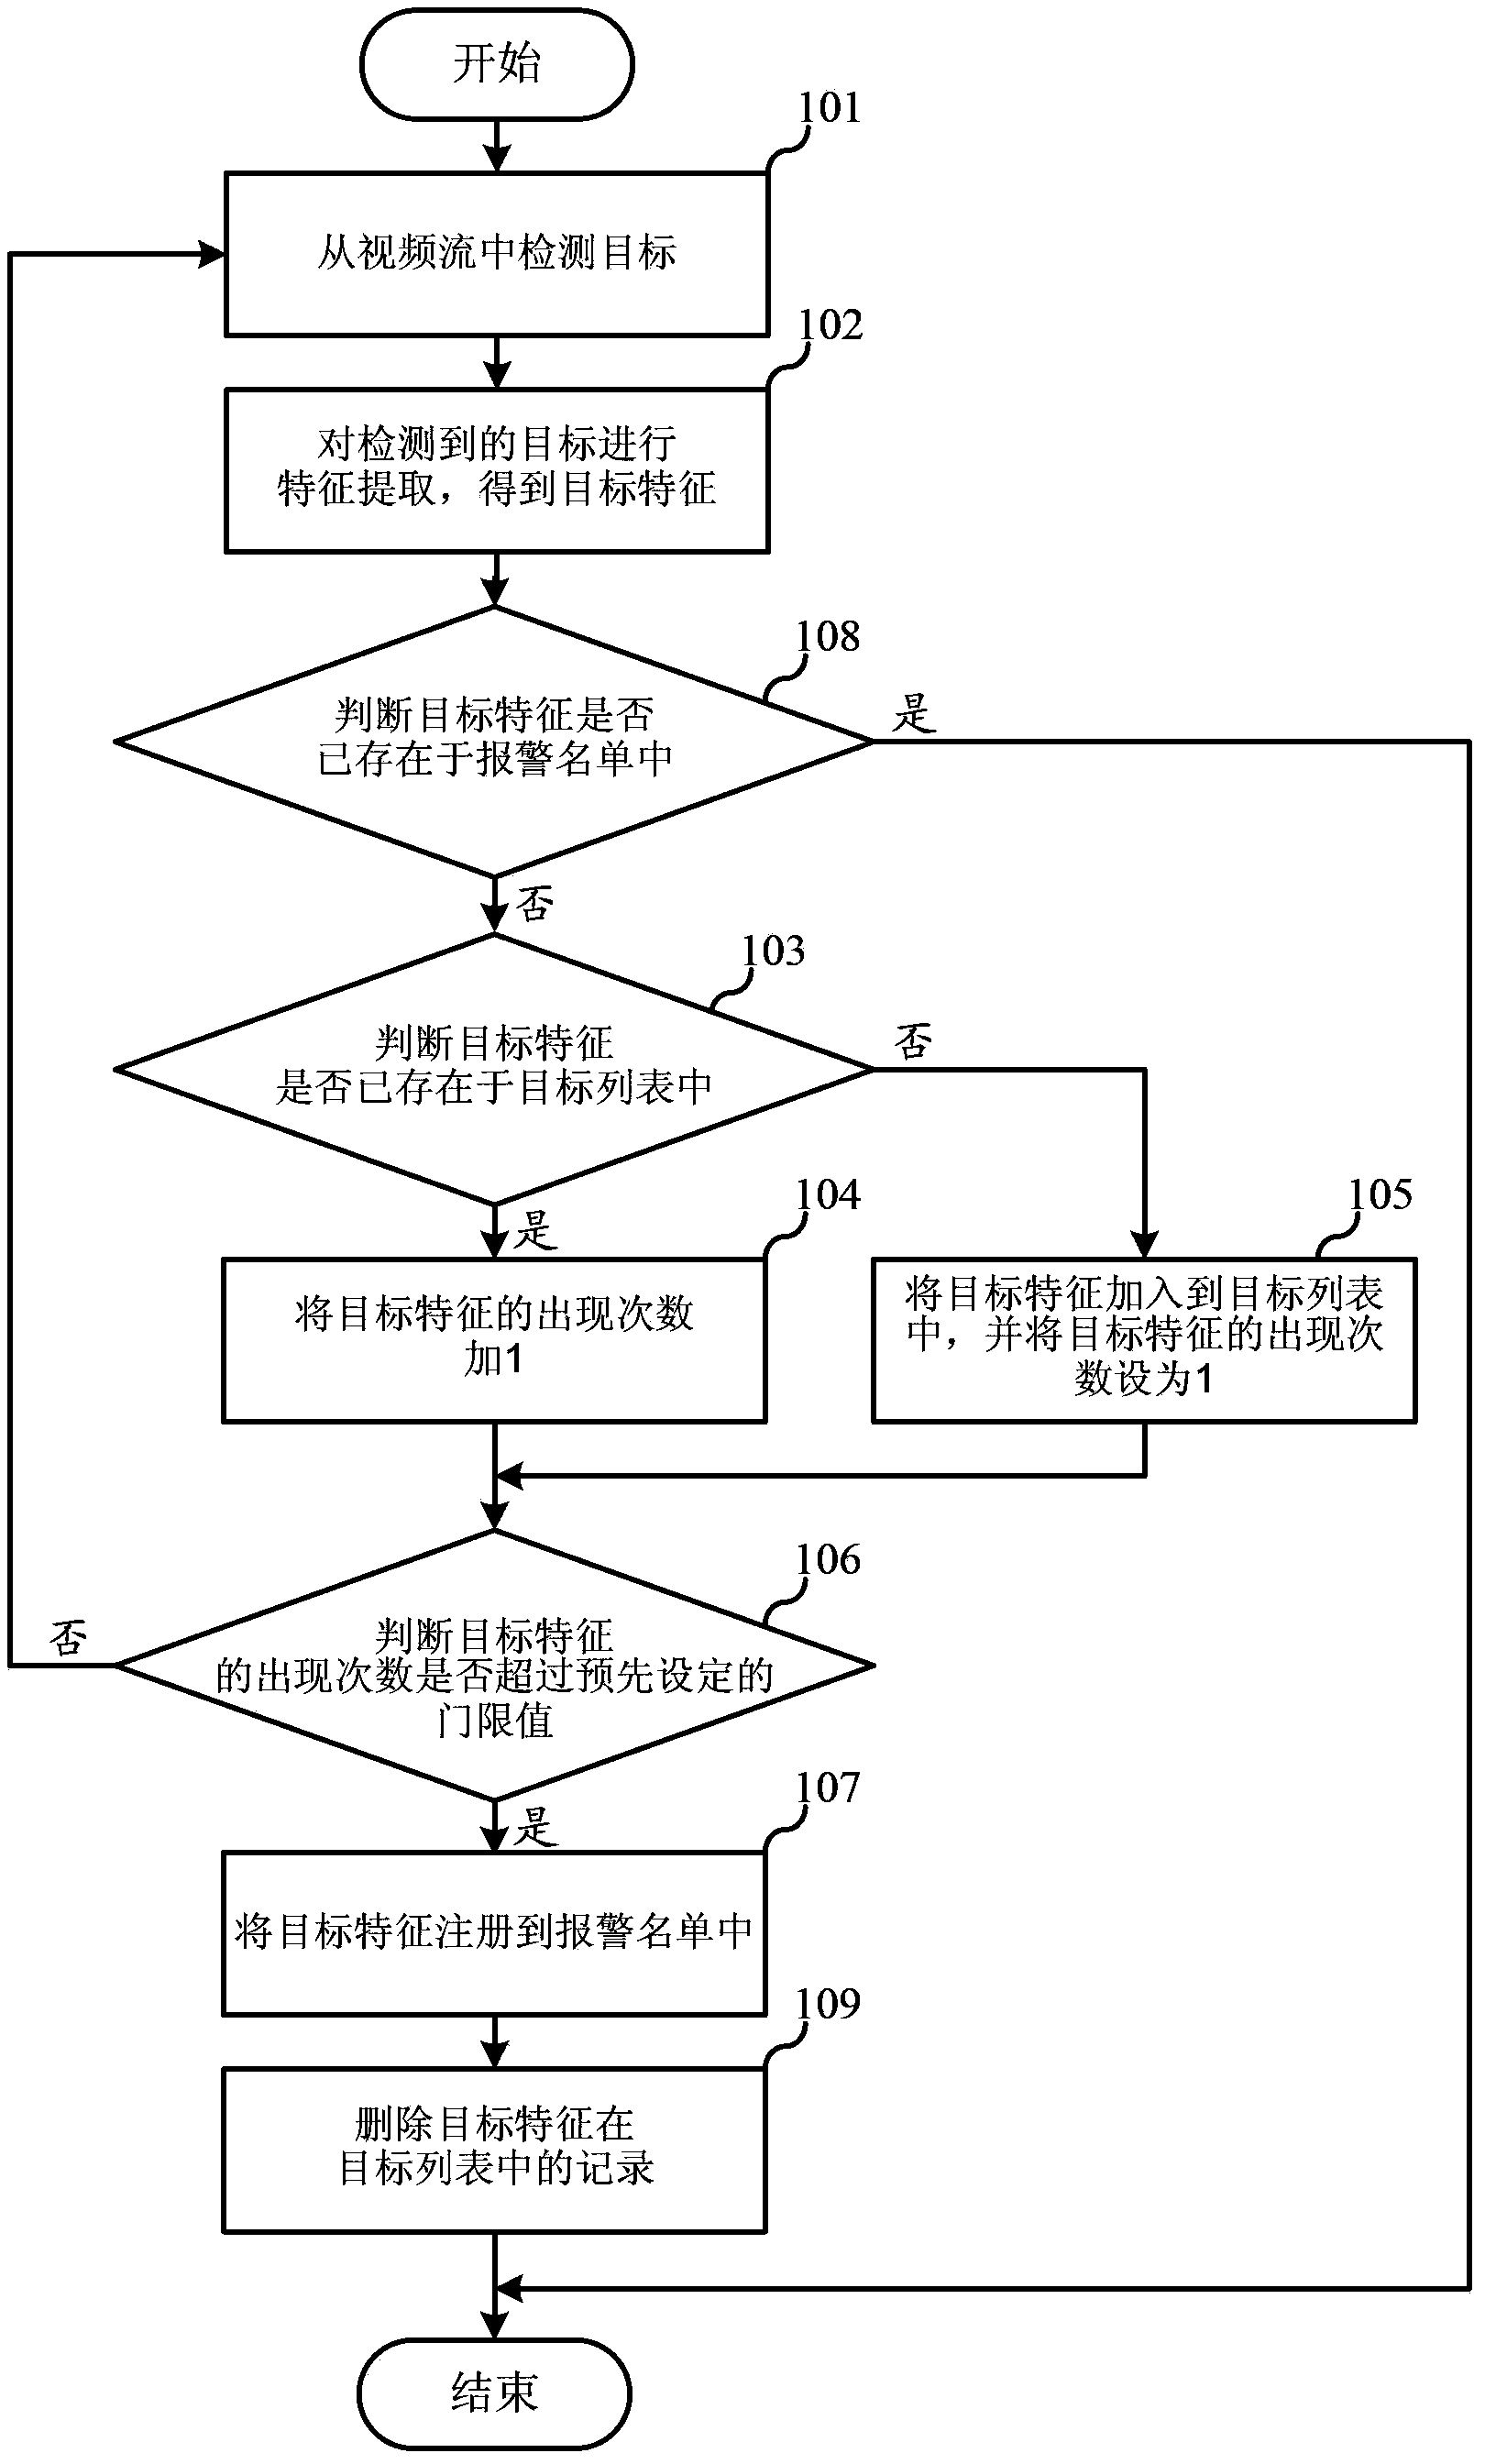 Method and system for automatically finding and registering target in surveillance video